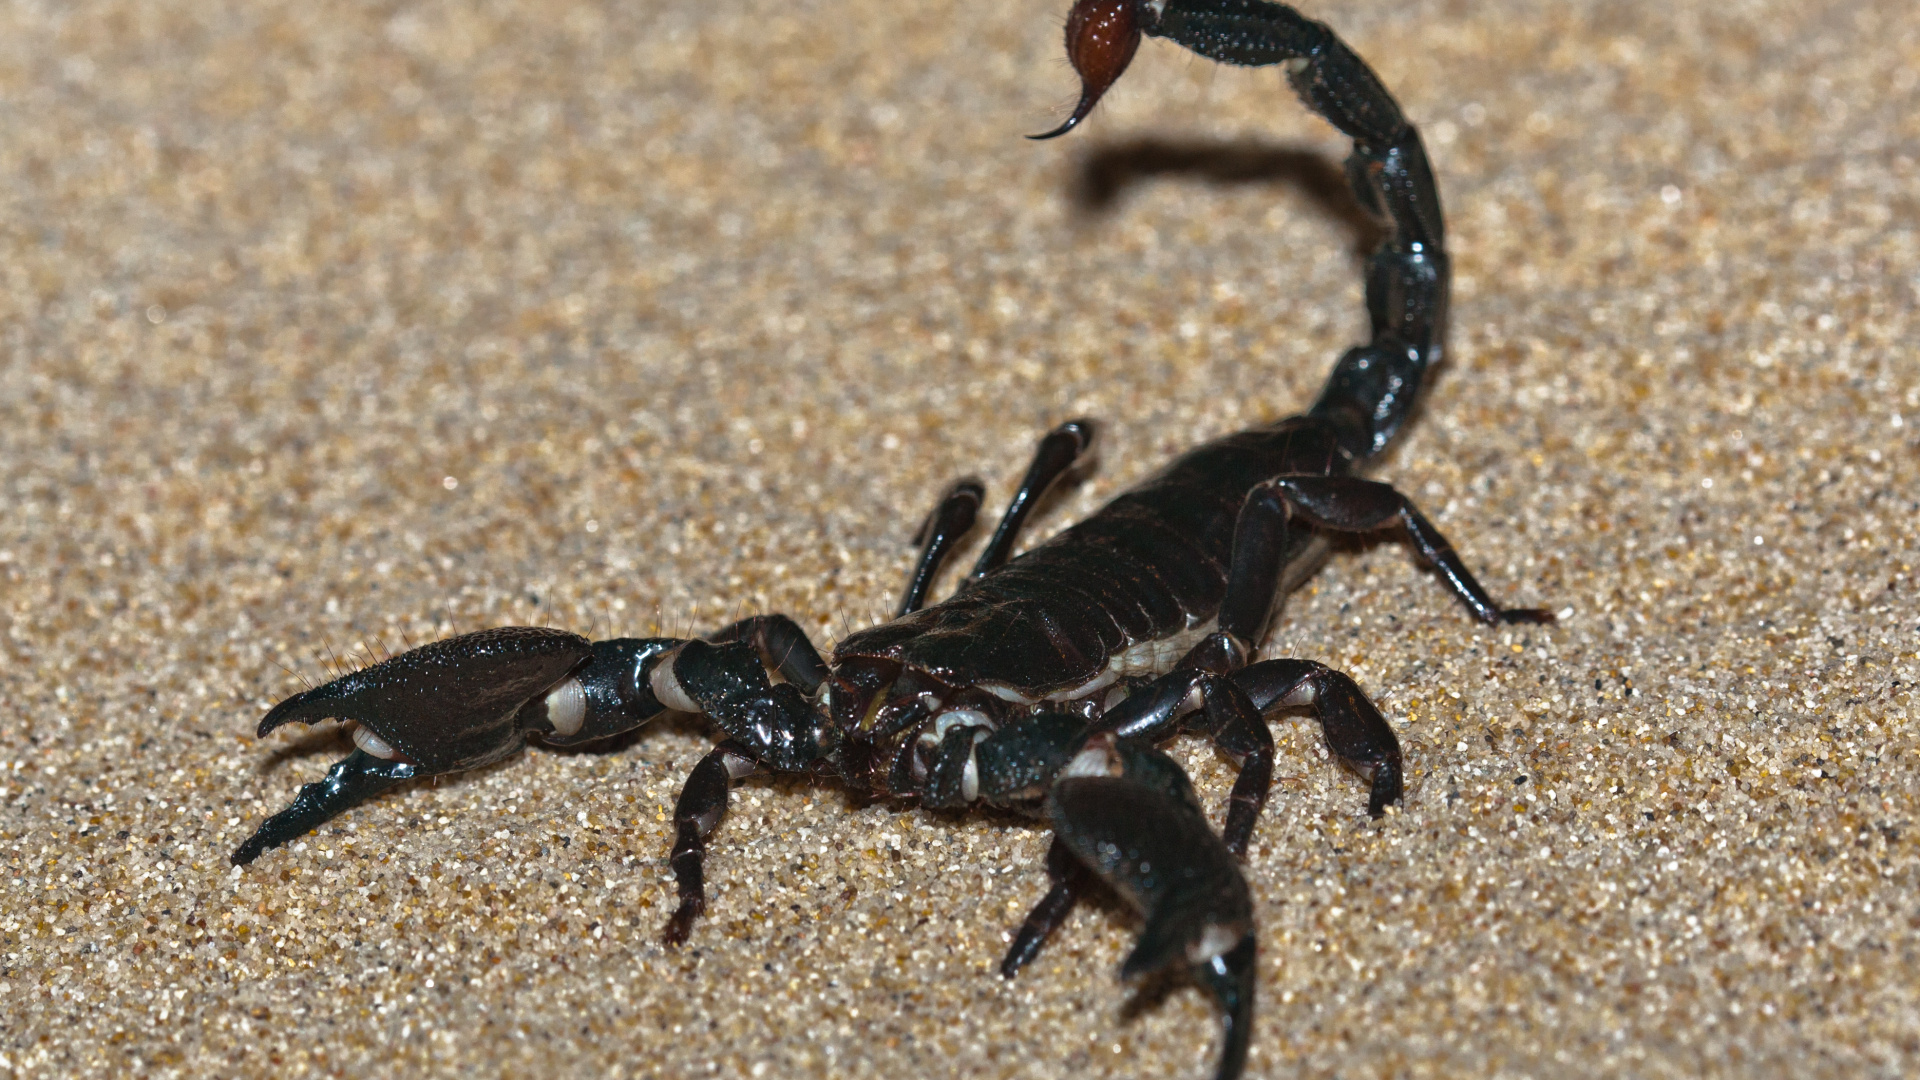 Scorpion (Animal): Emperor scorpion, Can live without food for a full year. 1920x1080 Full HD Background.